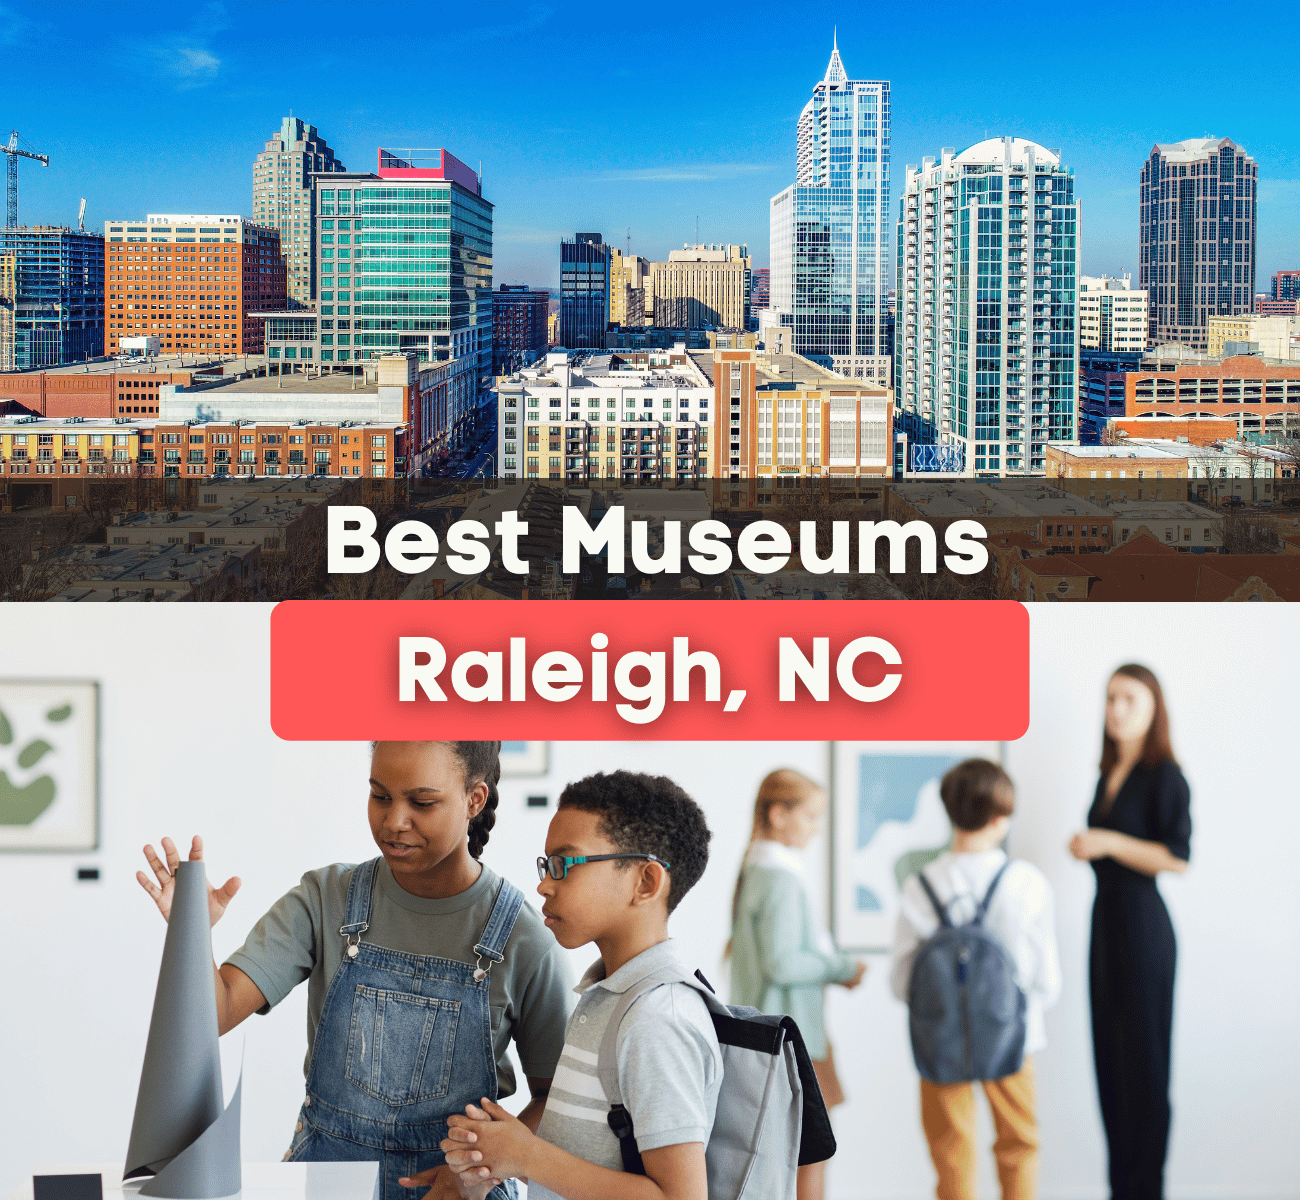 best museums in Raleigh, NC - Raleigh skyline and kids at a museum